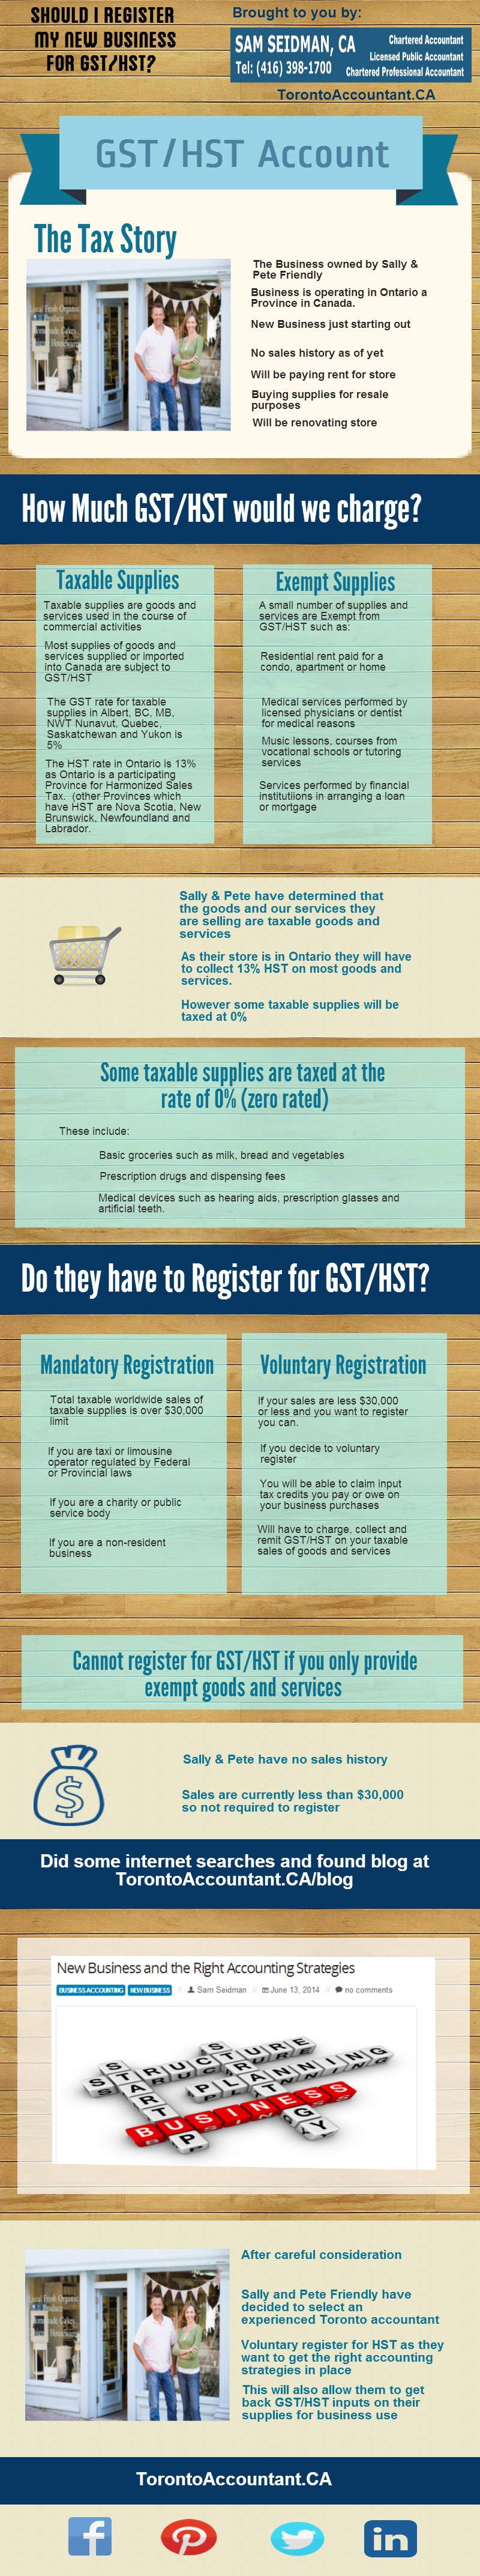 Infographic Voluntary registration tax story